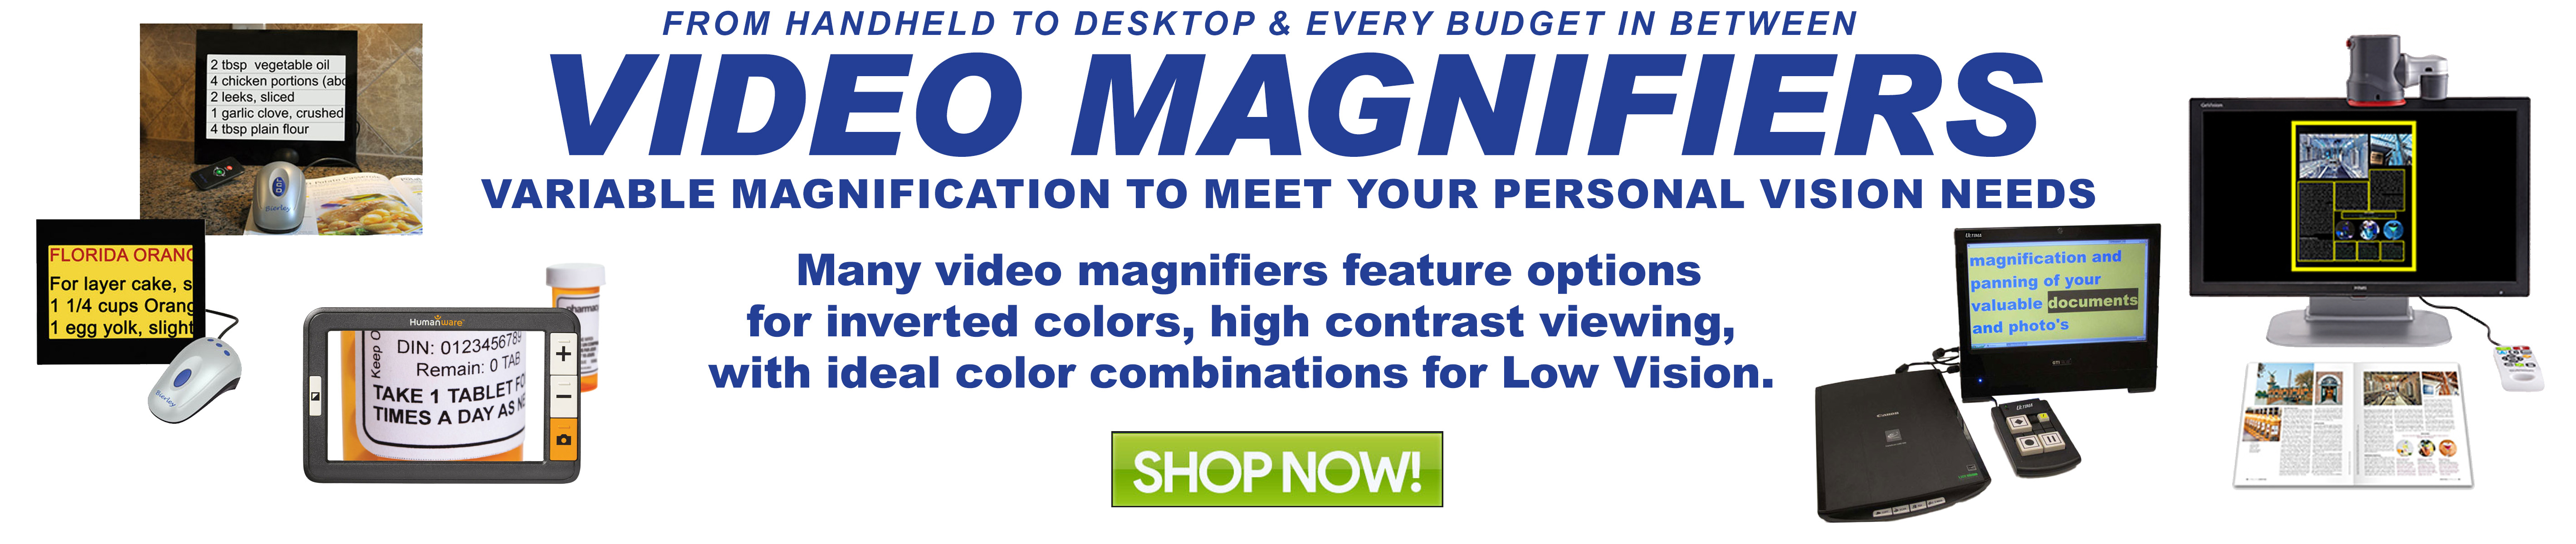 Video Magnifiers